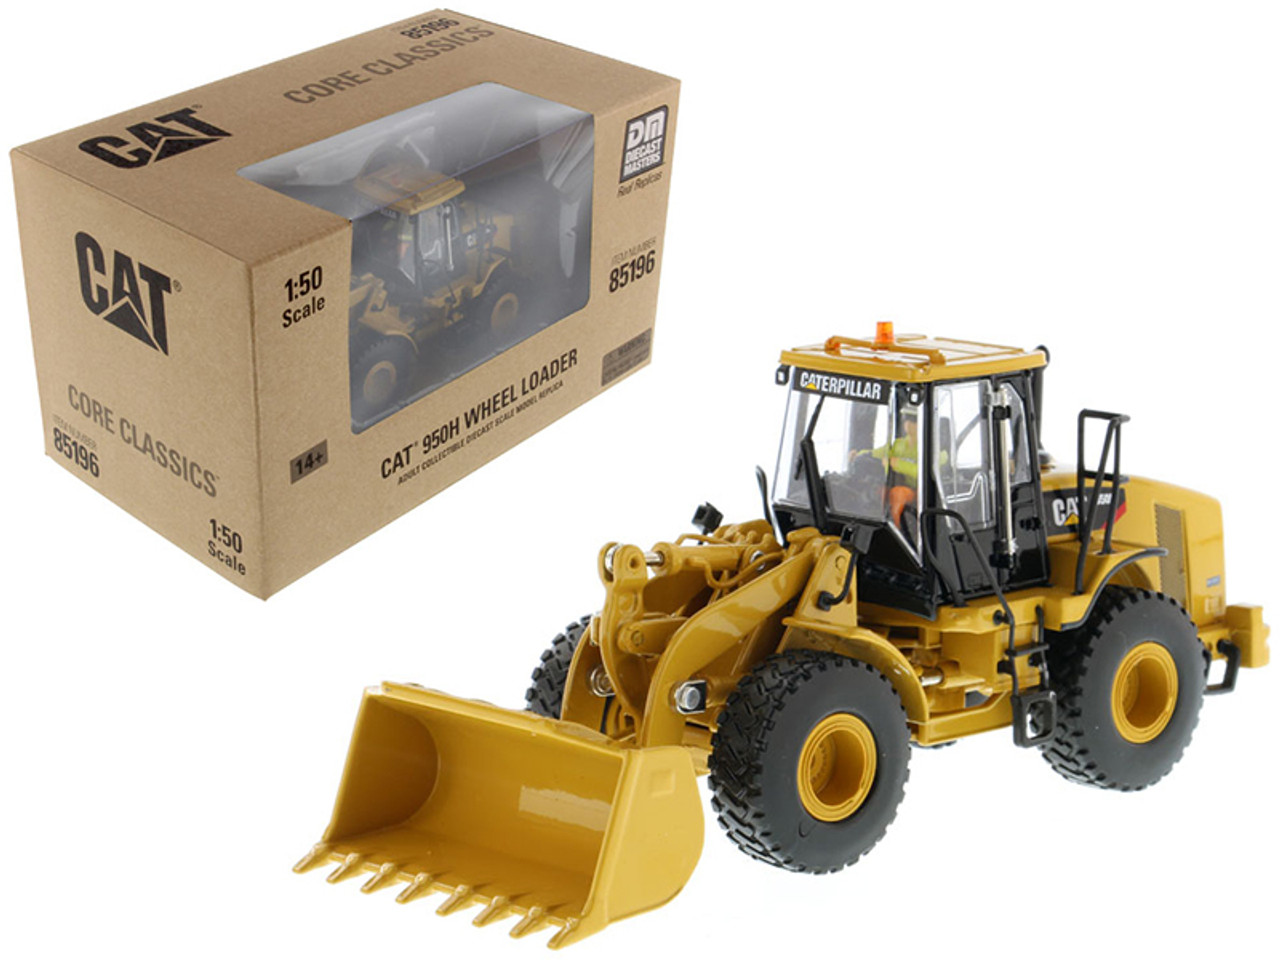 CAT Caterpillar 950H Wheel Loader with Operator "Core Classics Series" 1/50 Diecast Model by Diecast Masters